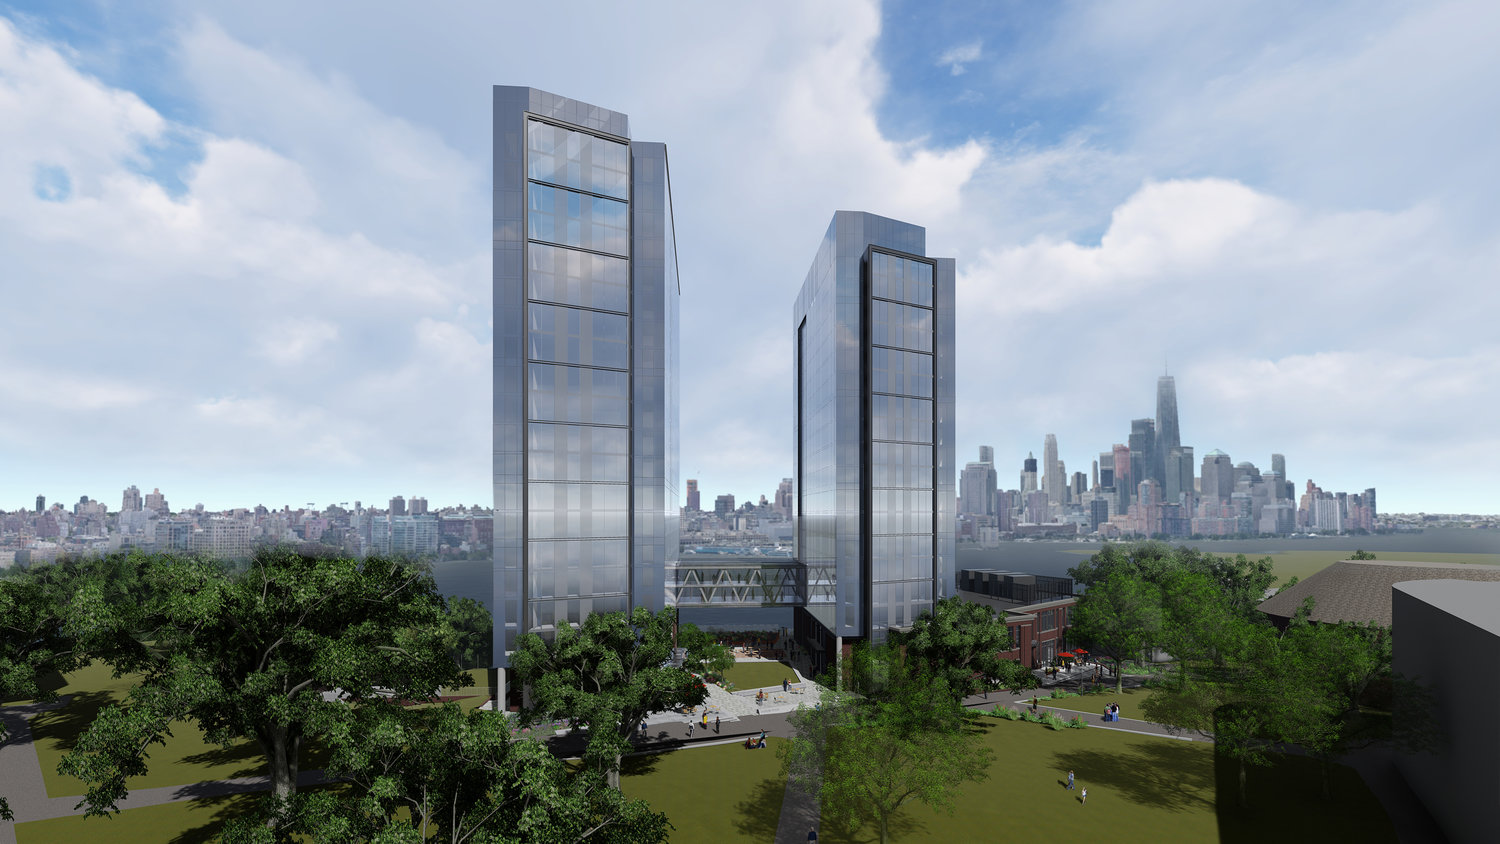 Stevens Institute Of Technology’s Growth Nears Completion In Hoboken, New Jersey